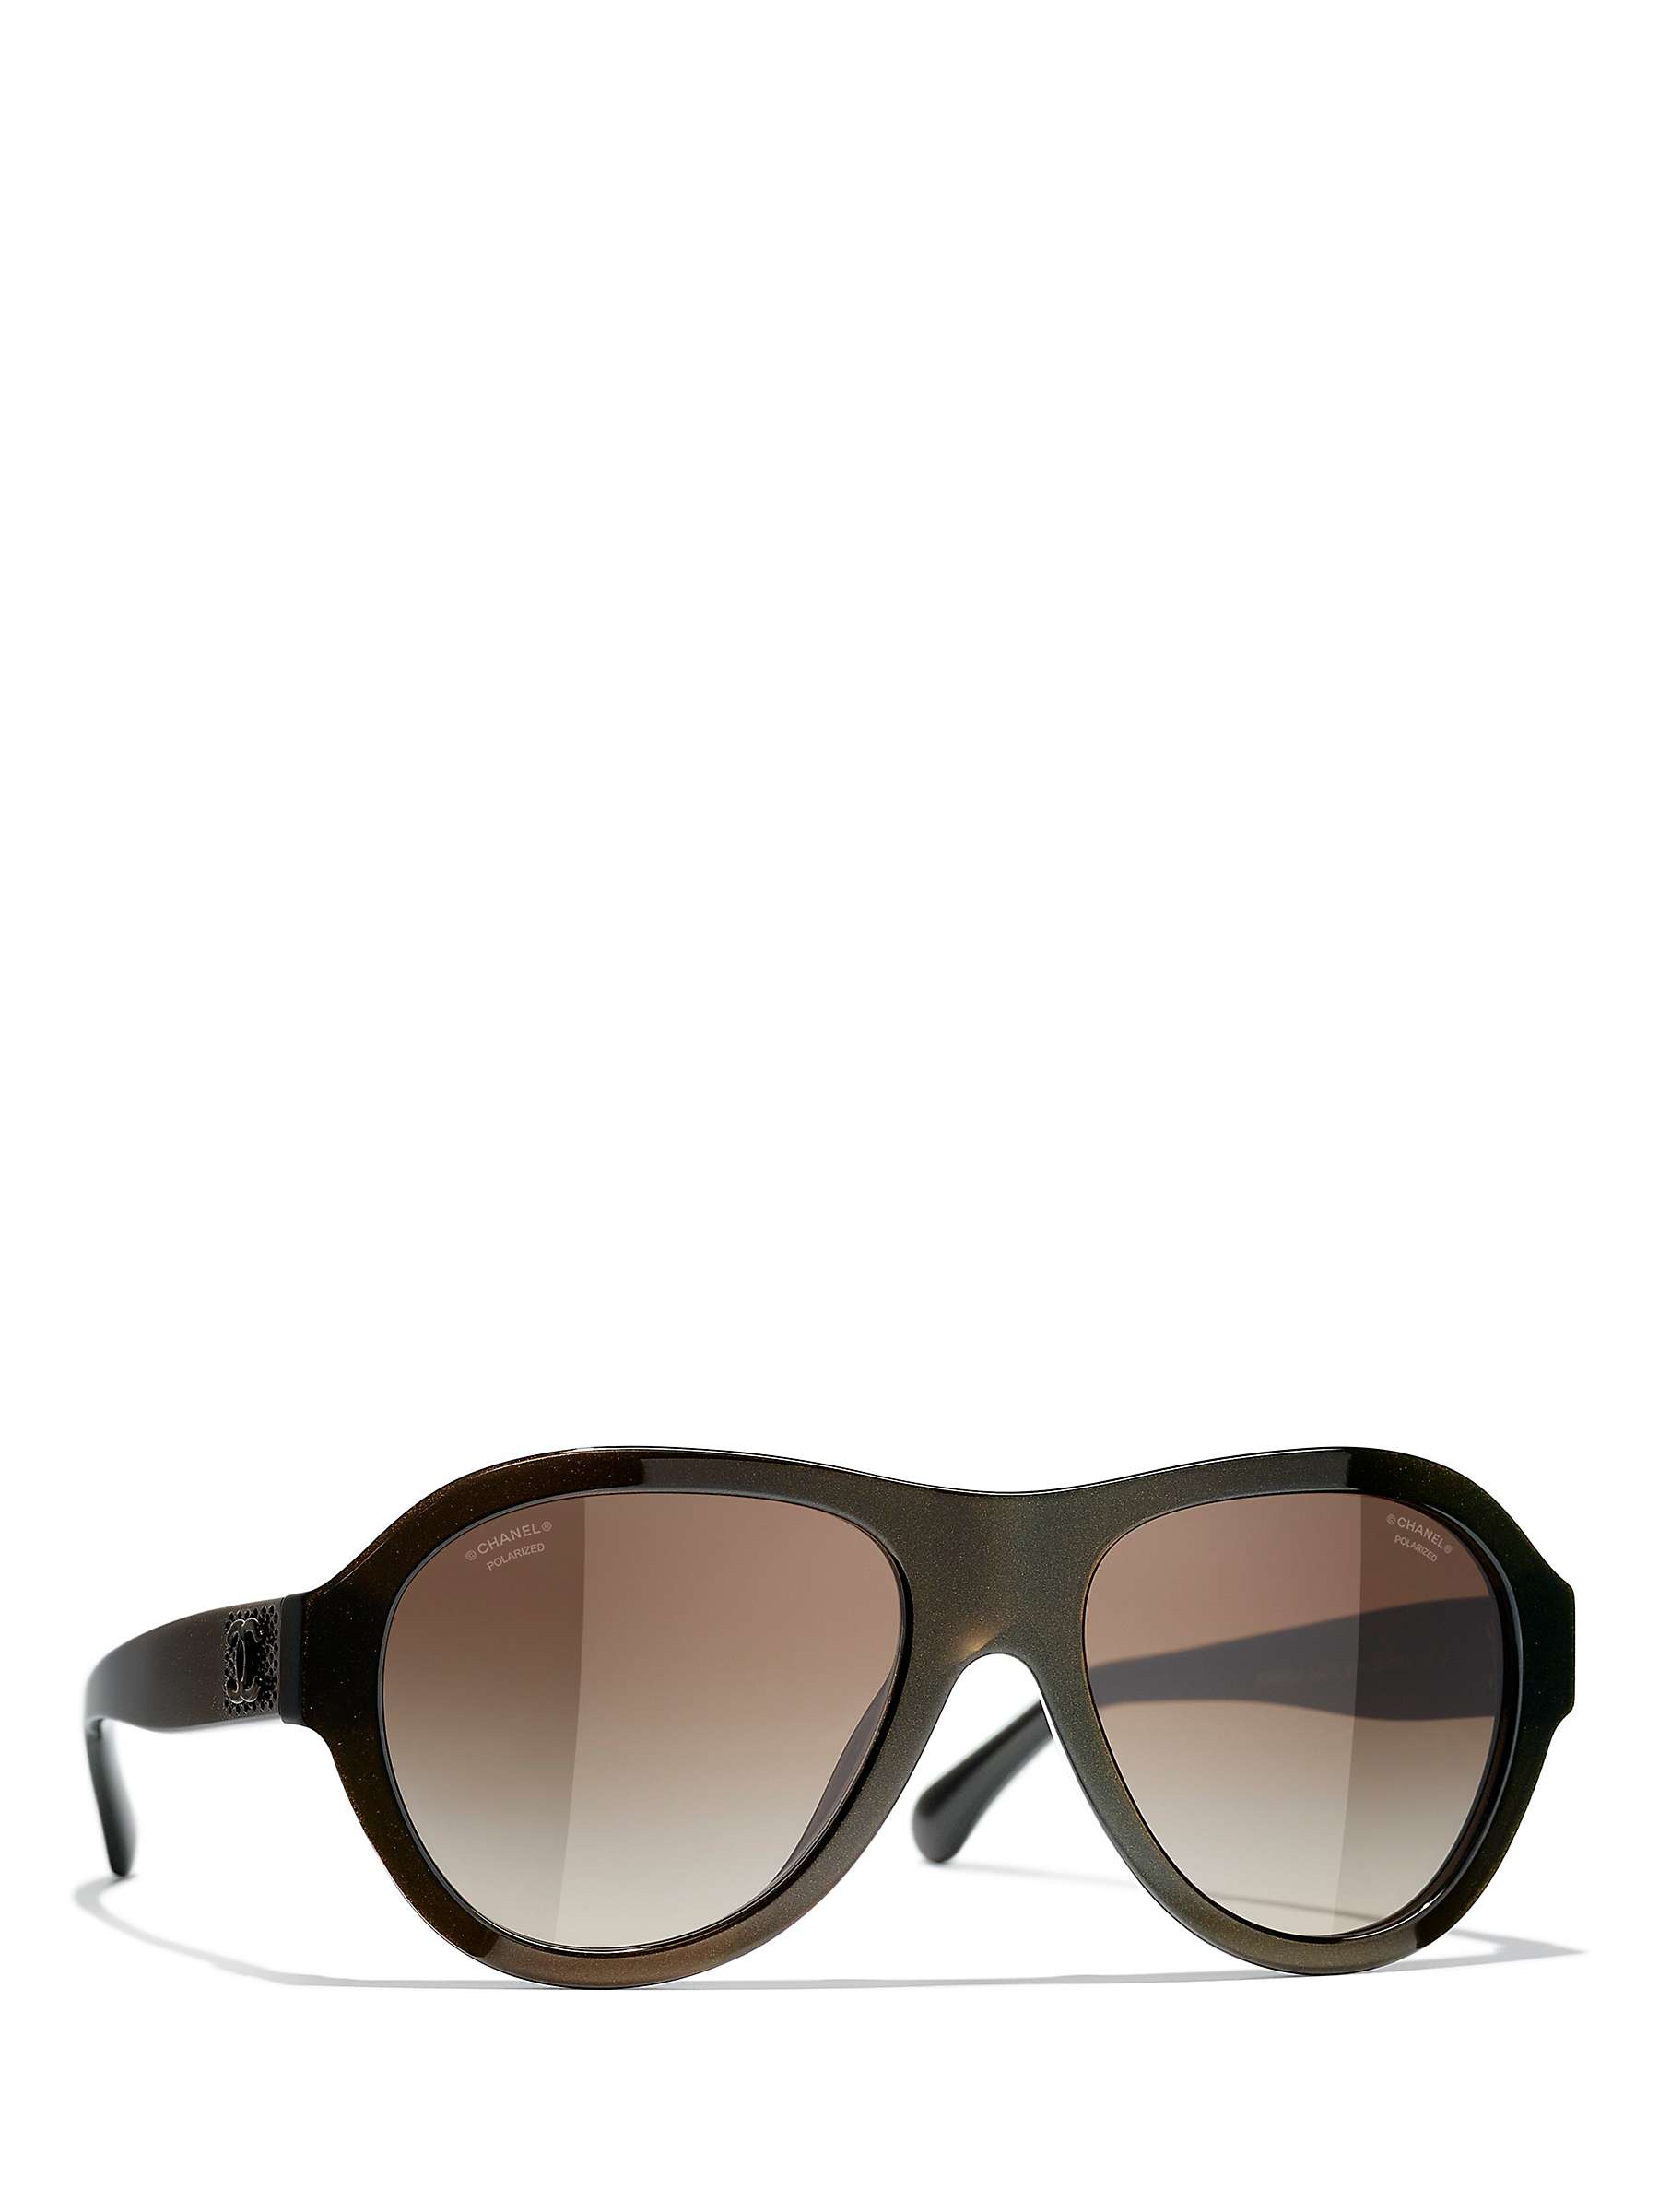 Buy CHANEL Oval Sunglasses CH5467B Iridescent Brown/Brown Gradient Online at johnlewis.com